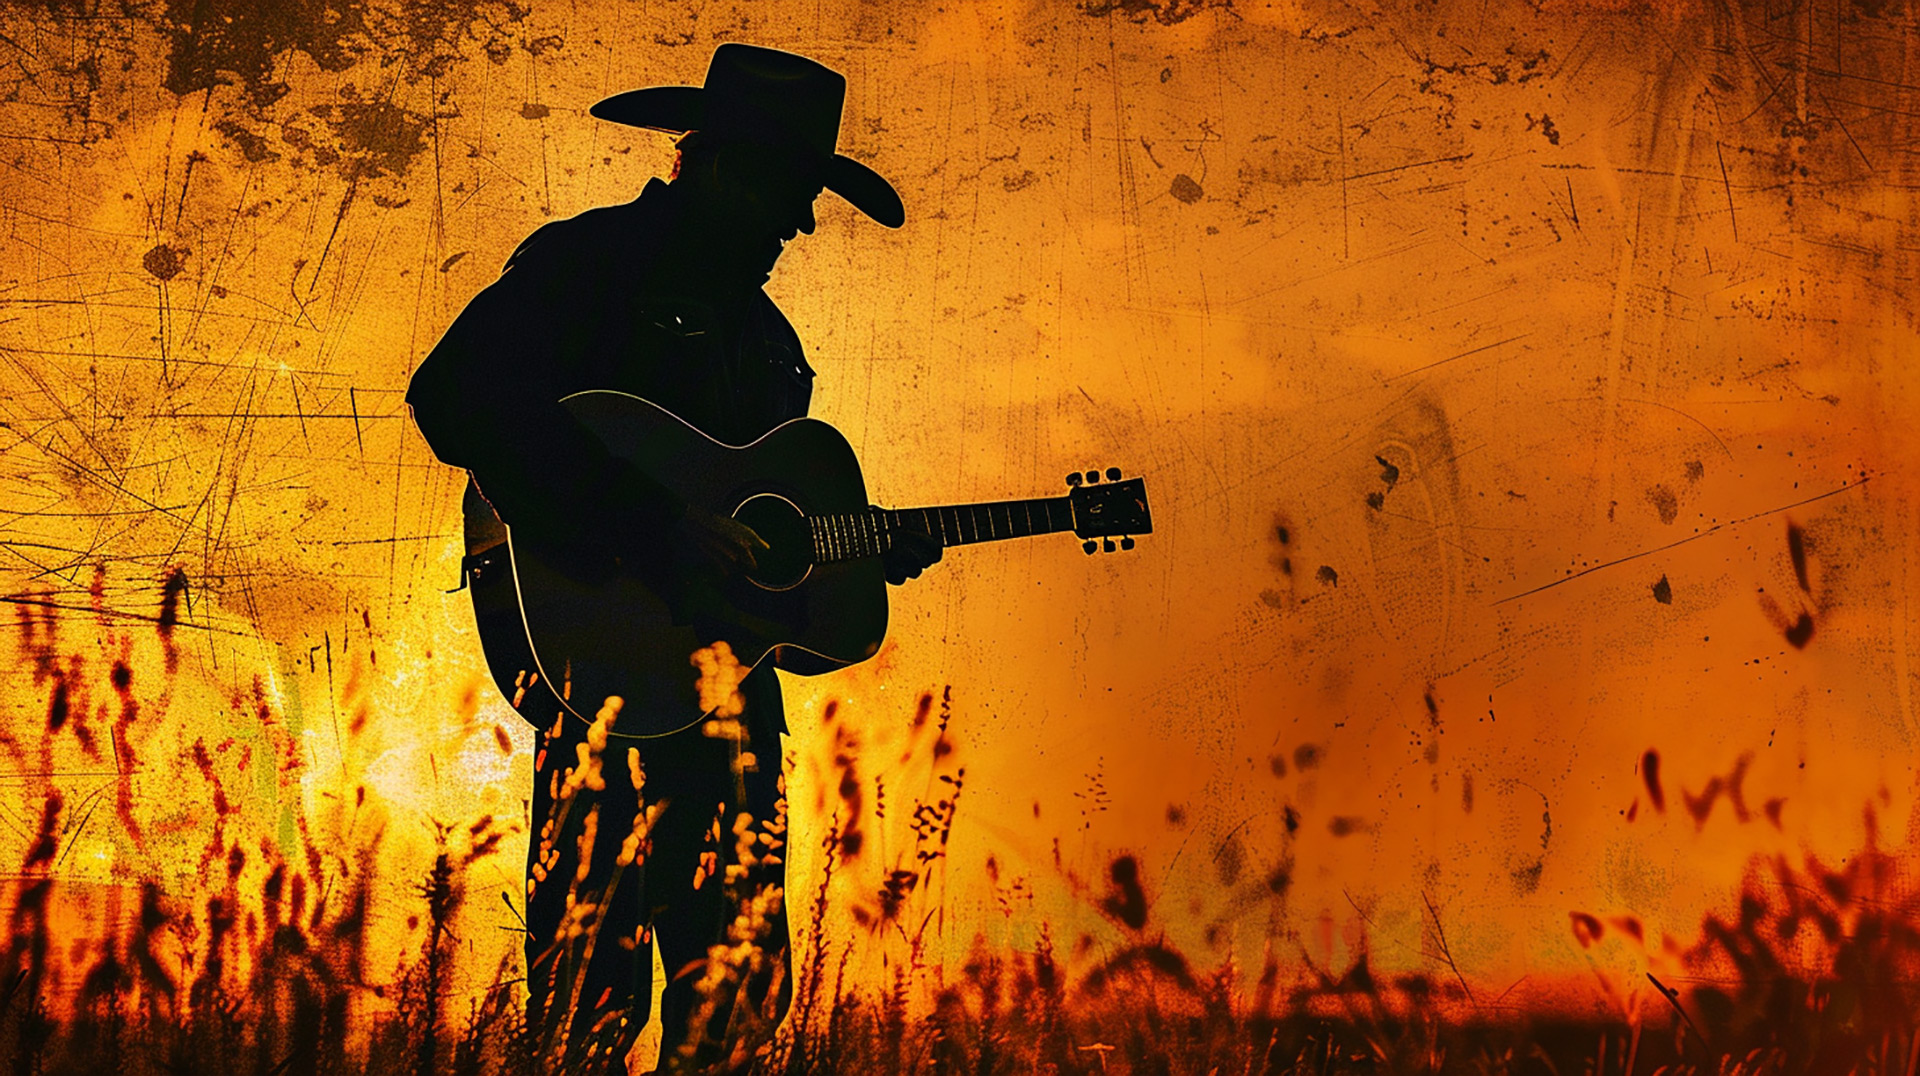 Cowboy Tunes: 16:9 Country Music Wallpaper